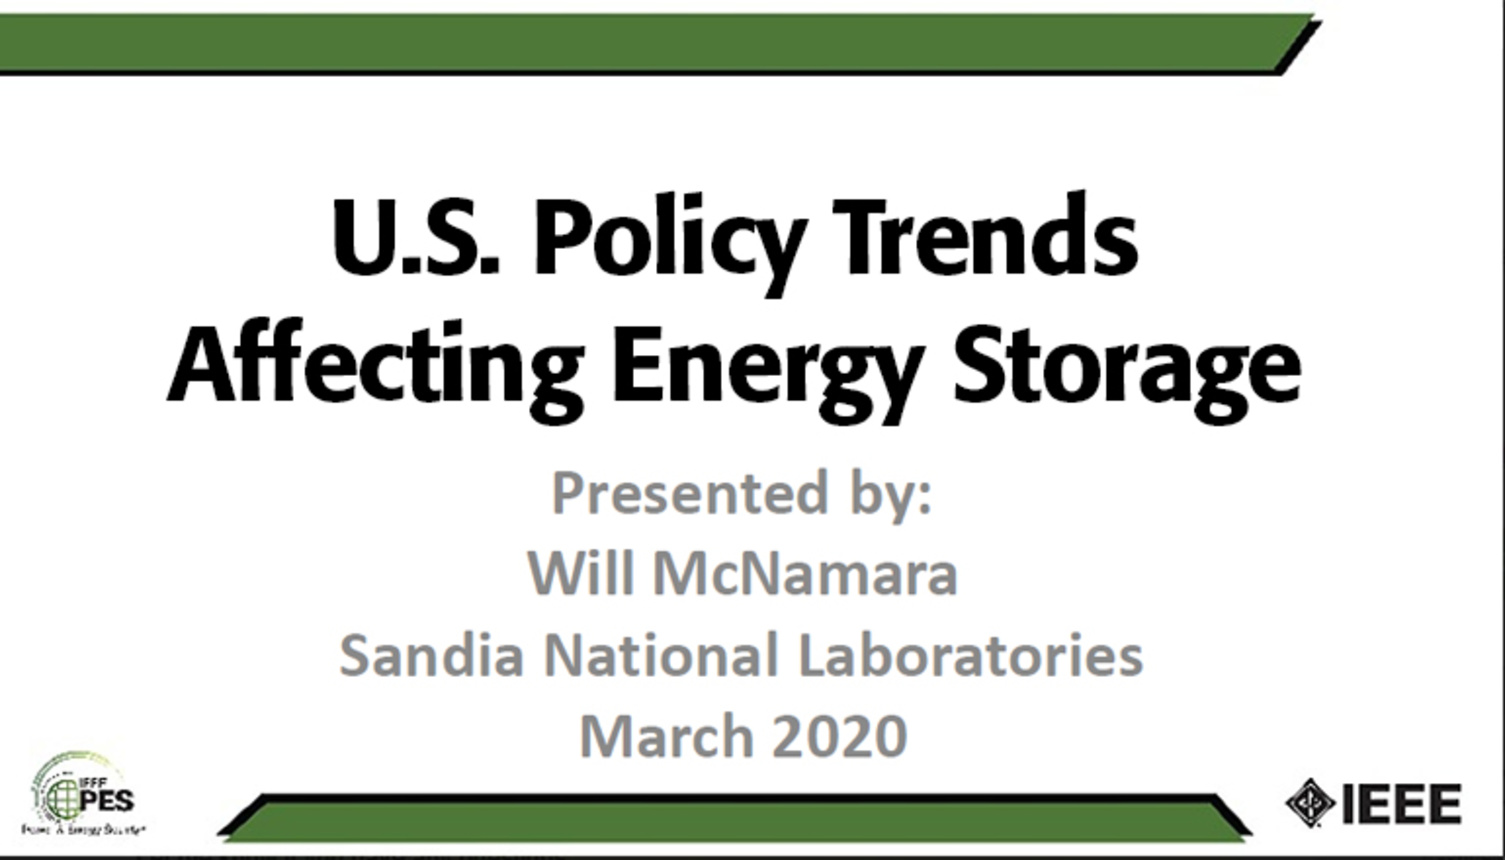 U.S. Policy Trends Affecting Energy Storage